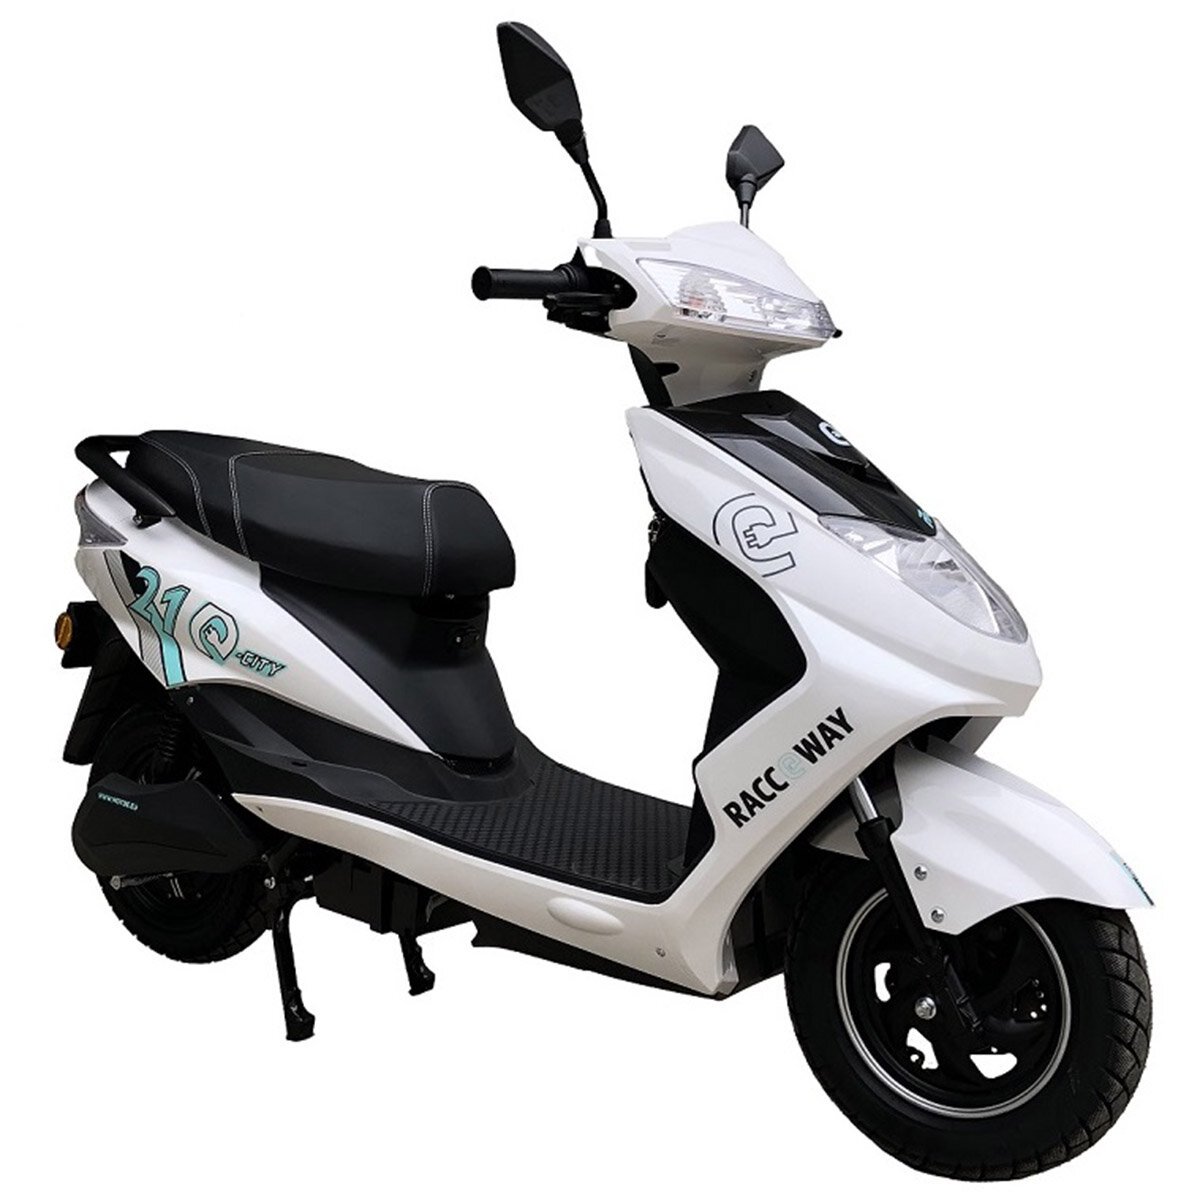 [EU Direct] RACCEWAY® MOTOE-03 Electric Scooter 72V 20AH 1500W 10inch Tires 59KM Mileage 150KG Payload Electric Motorcyc